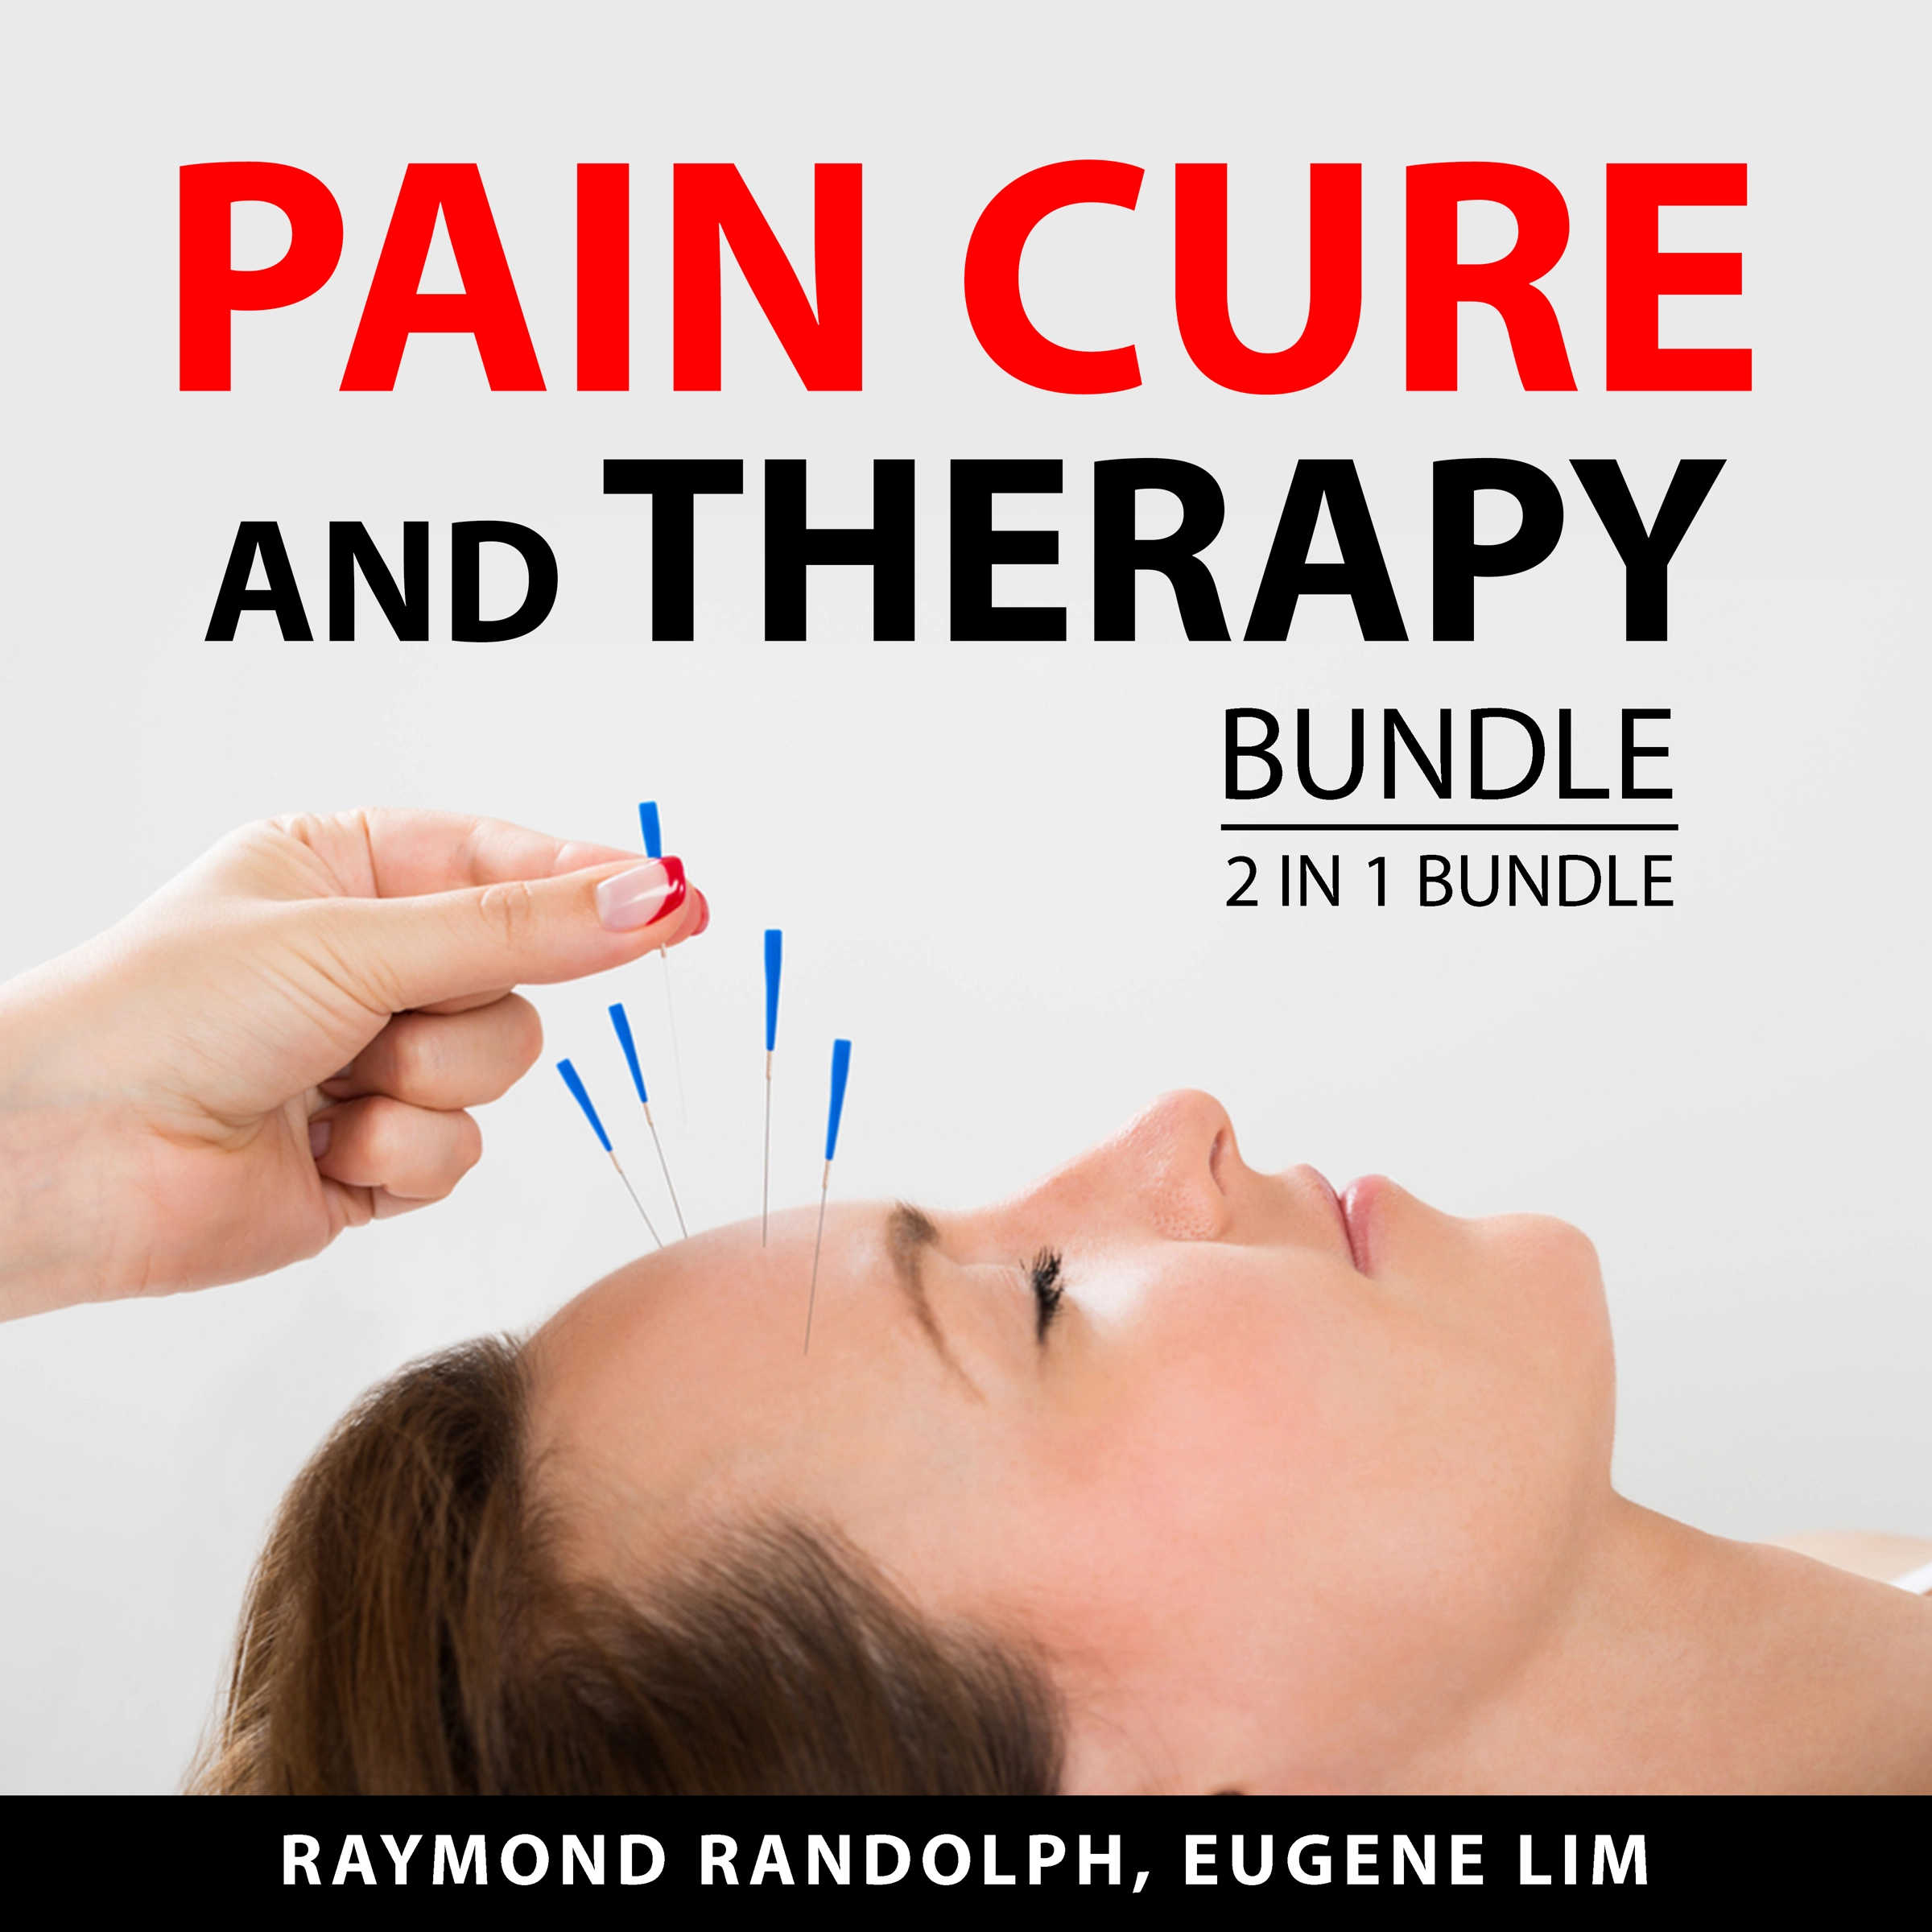 Pain Cure and Therapy Bundle, 2 in 1 Bundle Audiobook by Eugene Lim